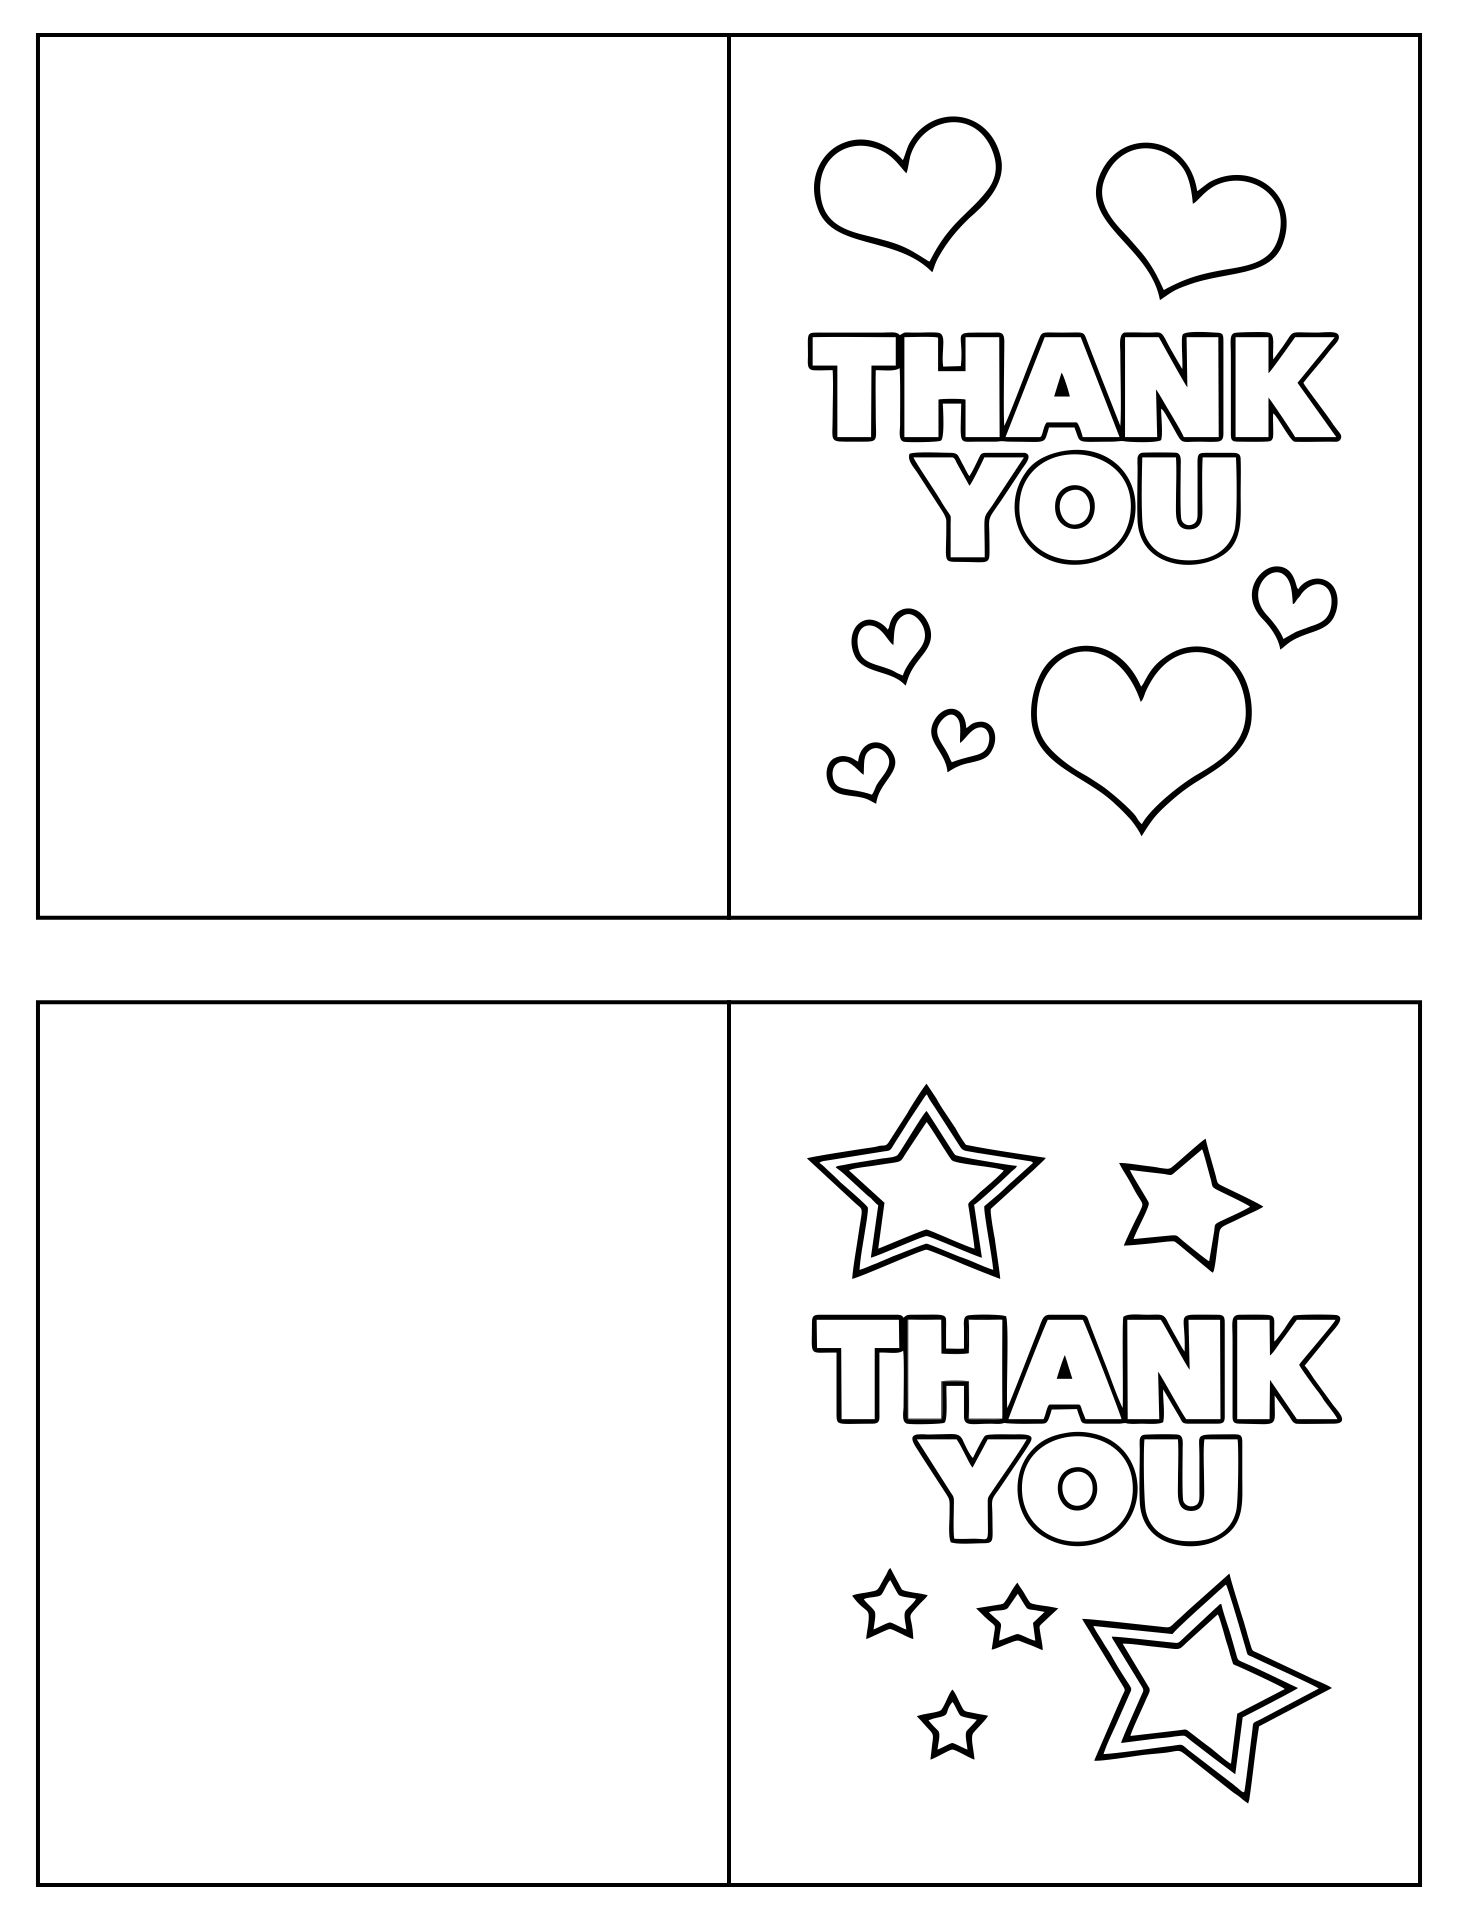 free printable thank you cards for kids to color send sunny day family